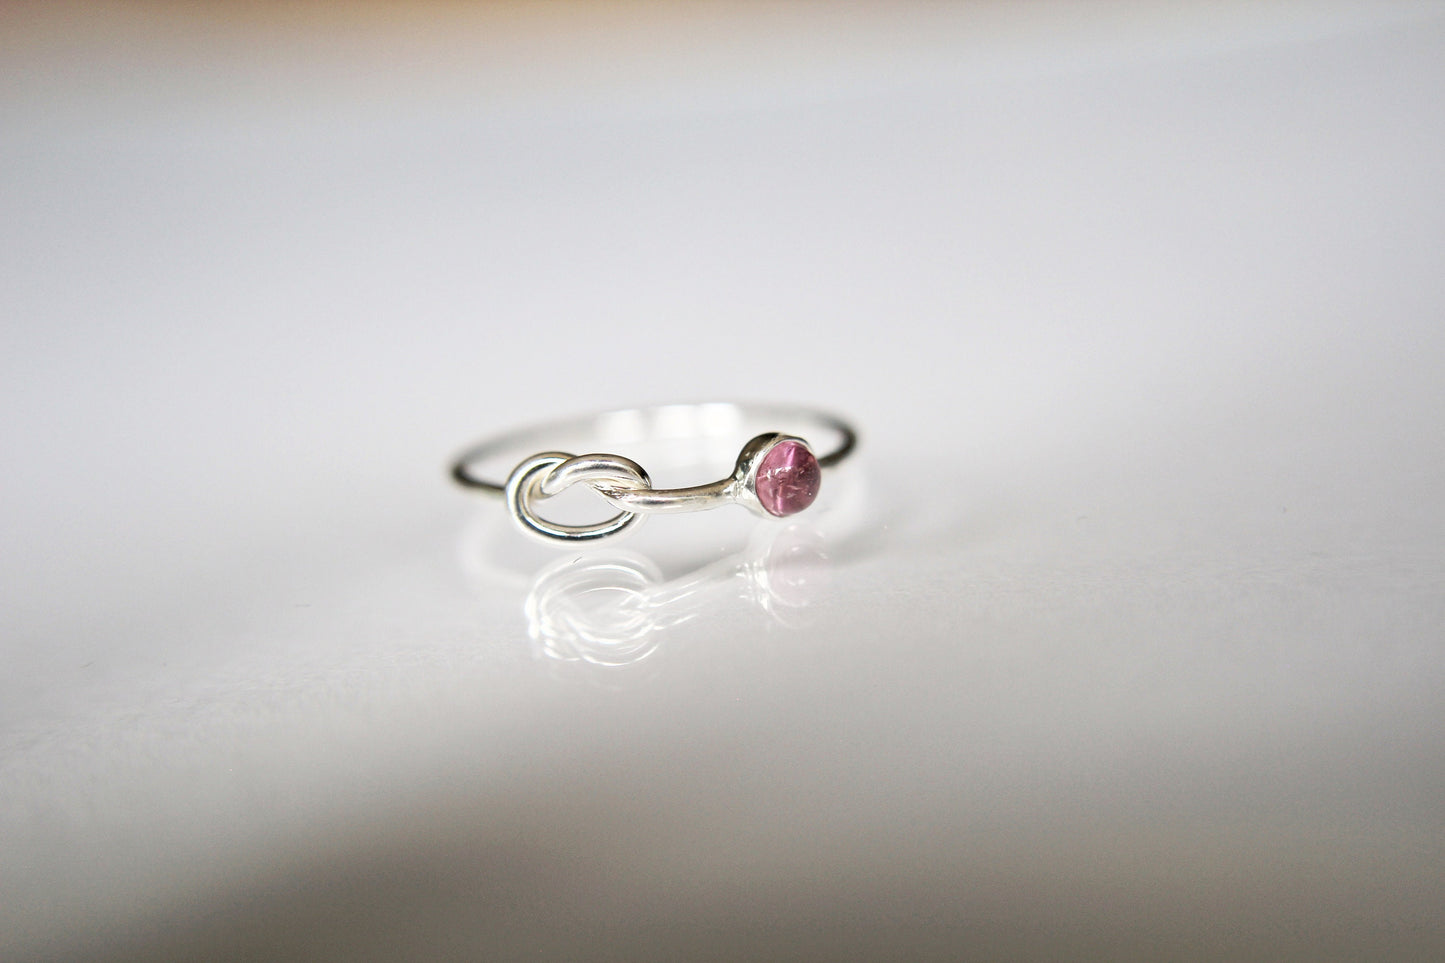 Gemstone Knot Ring, Tie the Knot Ring, Eternity Ring, Forever Ring, Mothers  Rings, Best Friend Rings, Unique Rings, Knot, Birthstone Ring